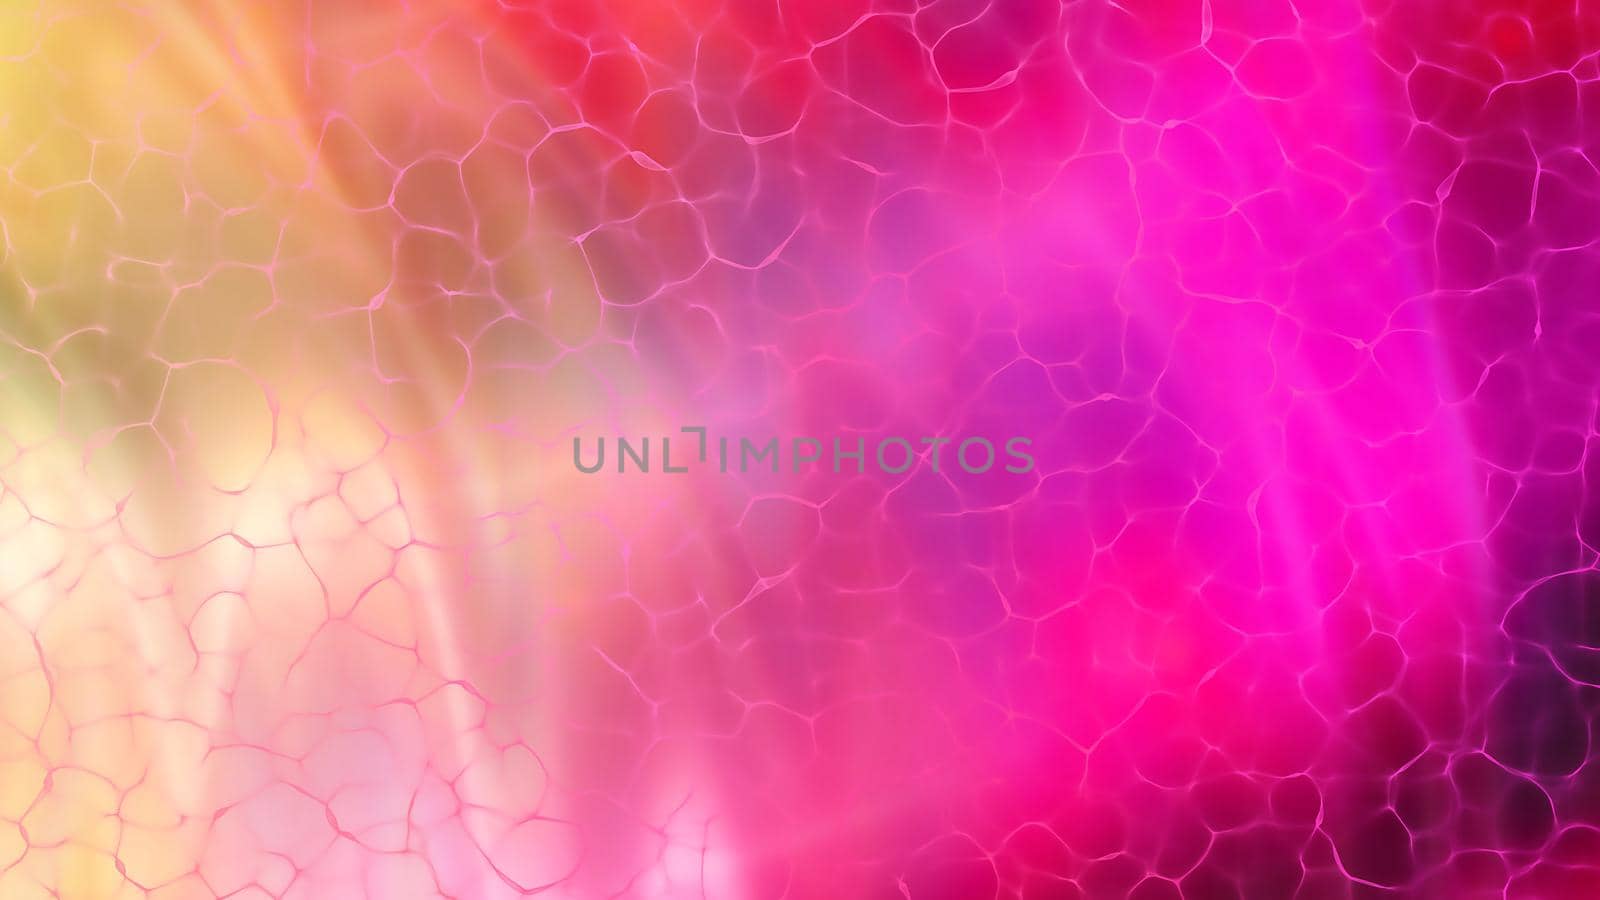 Abstract textured glowing fantasy background. Design, art